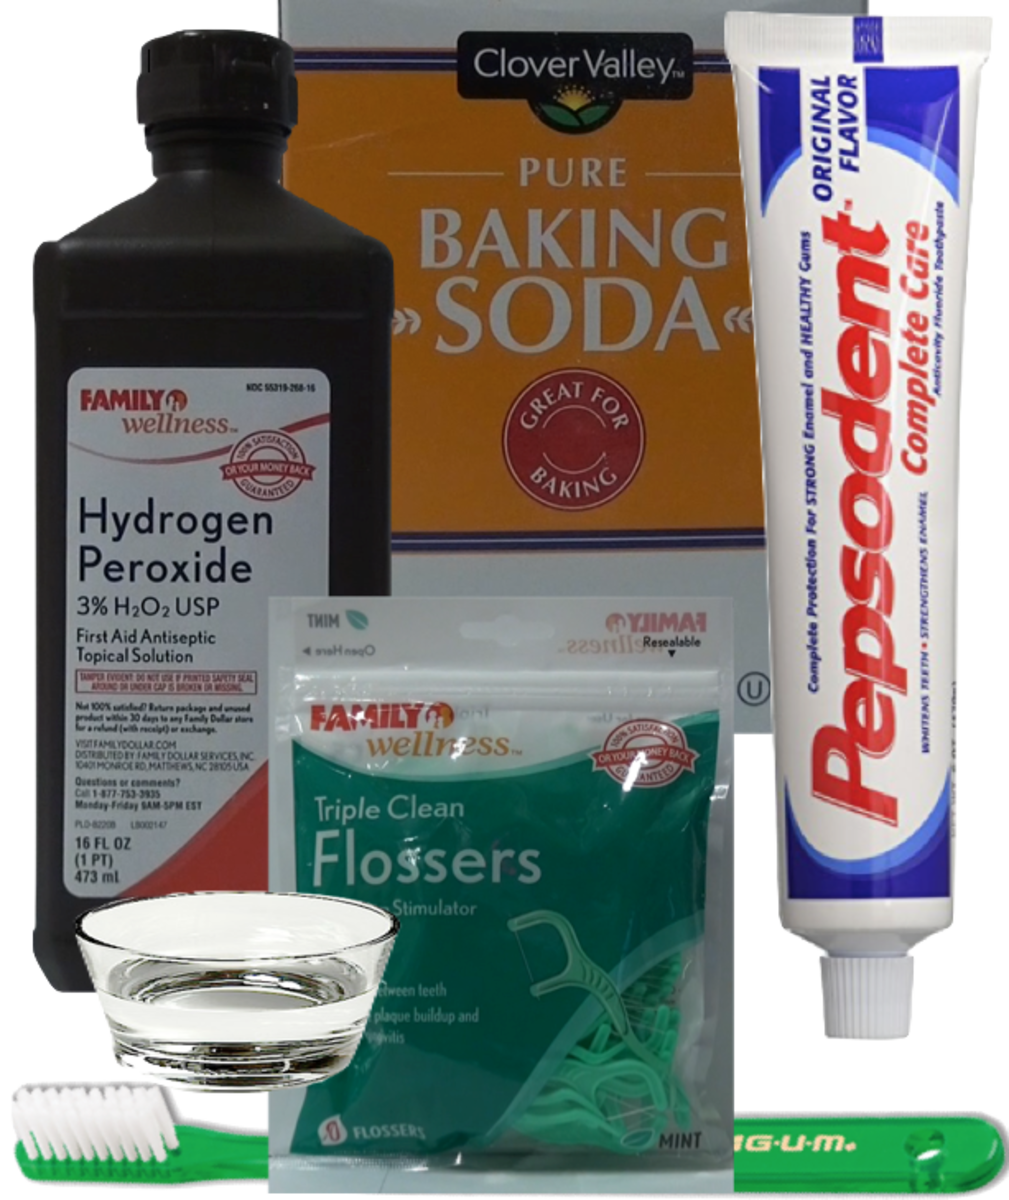 Using peroxide, triple clean flossers, and baking soda can empower your dental hygiene routine.